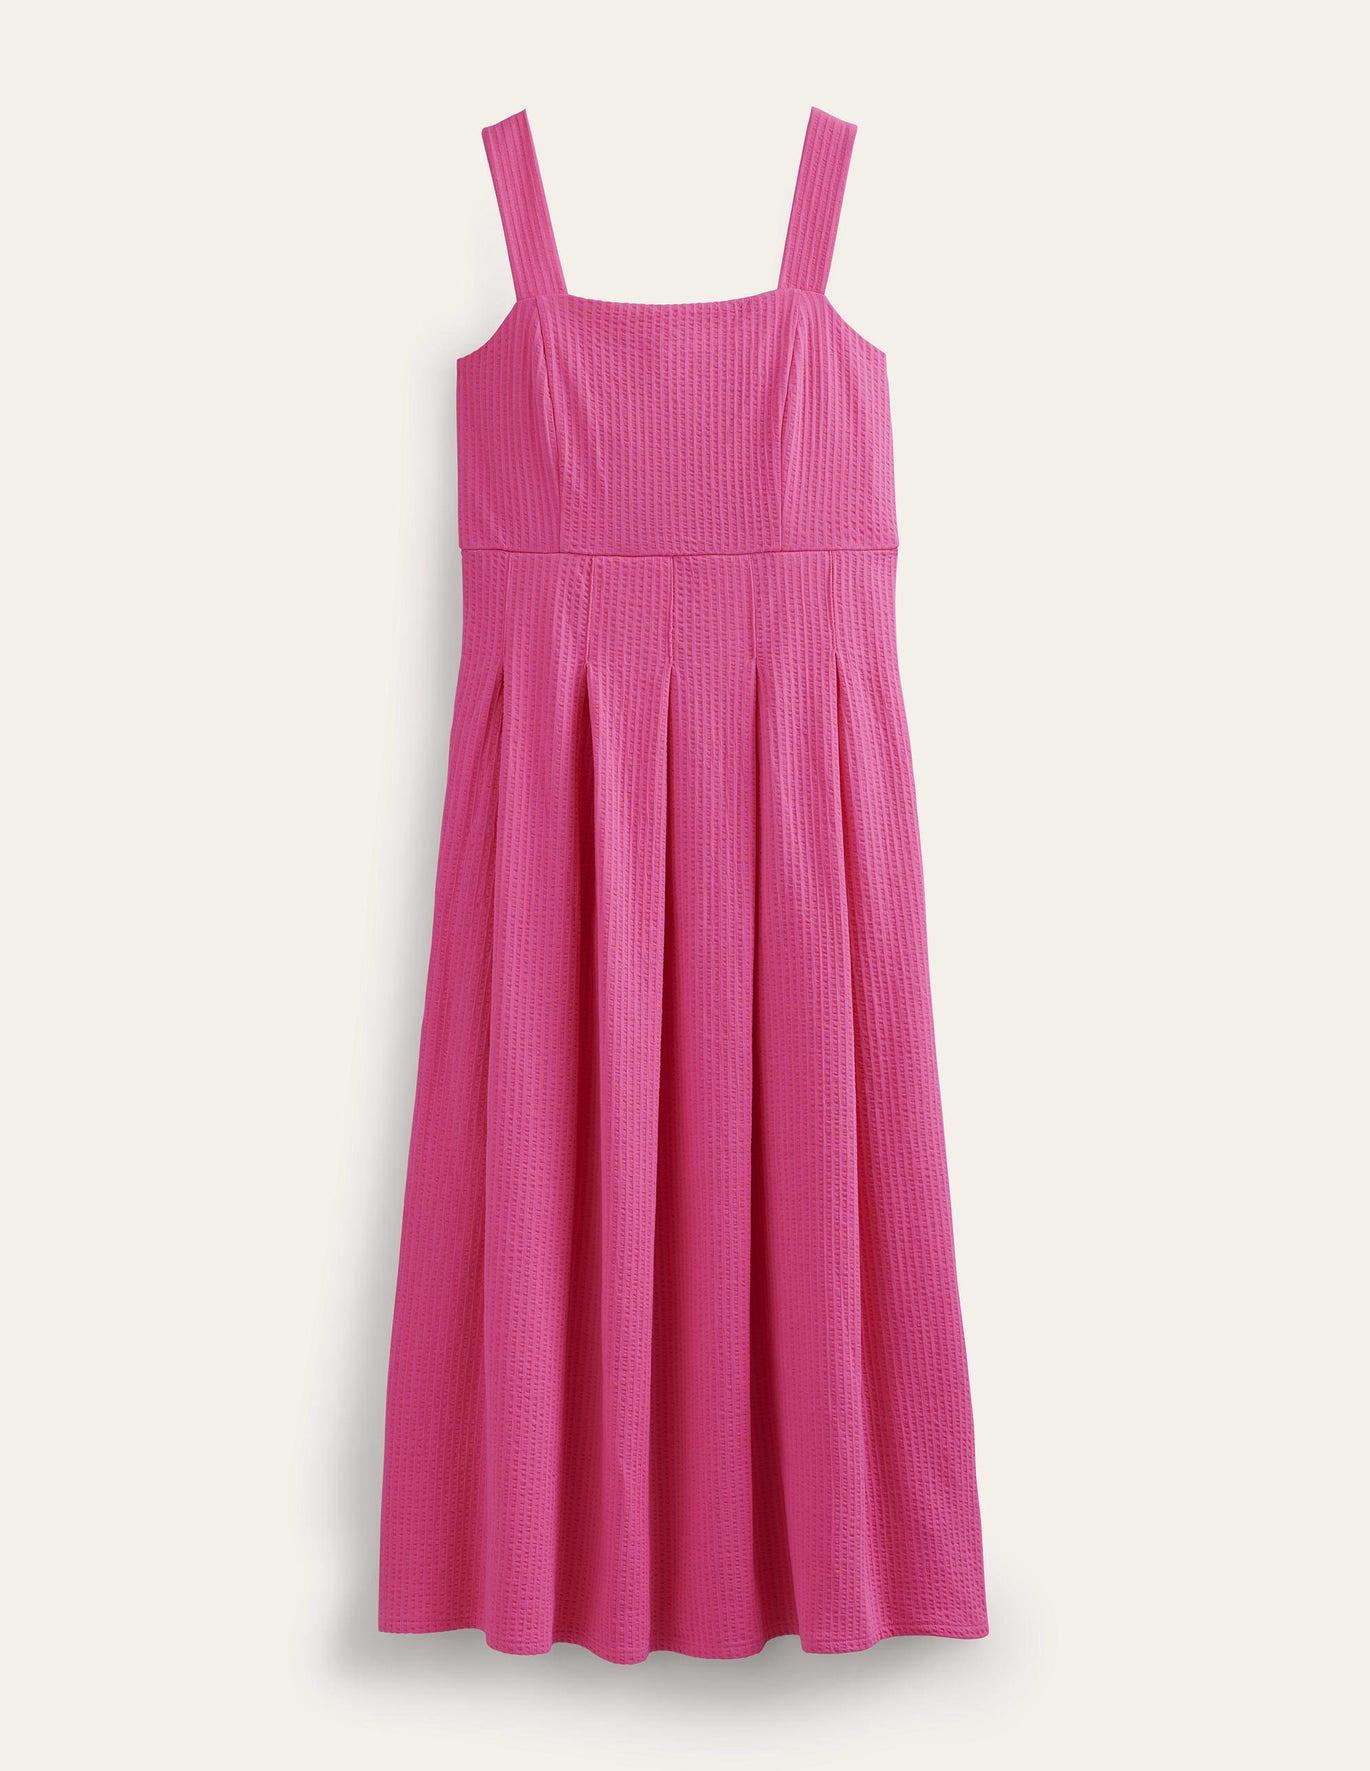 Boden Maxi Empire Tiered Dress in Pink | Lyst